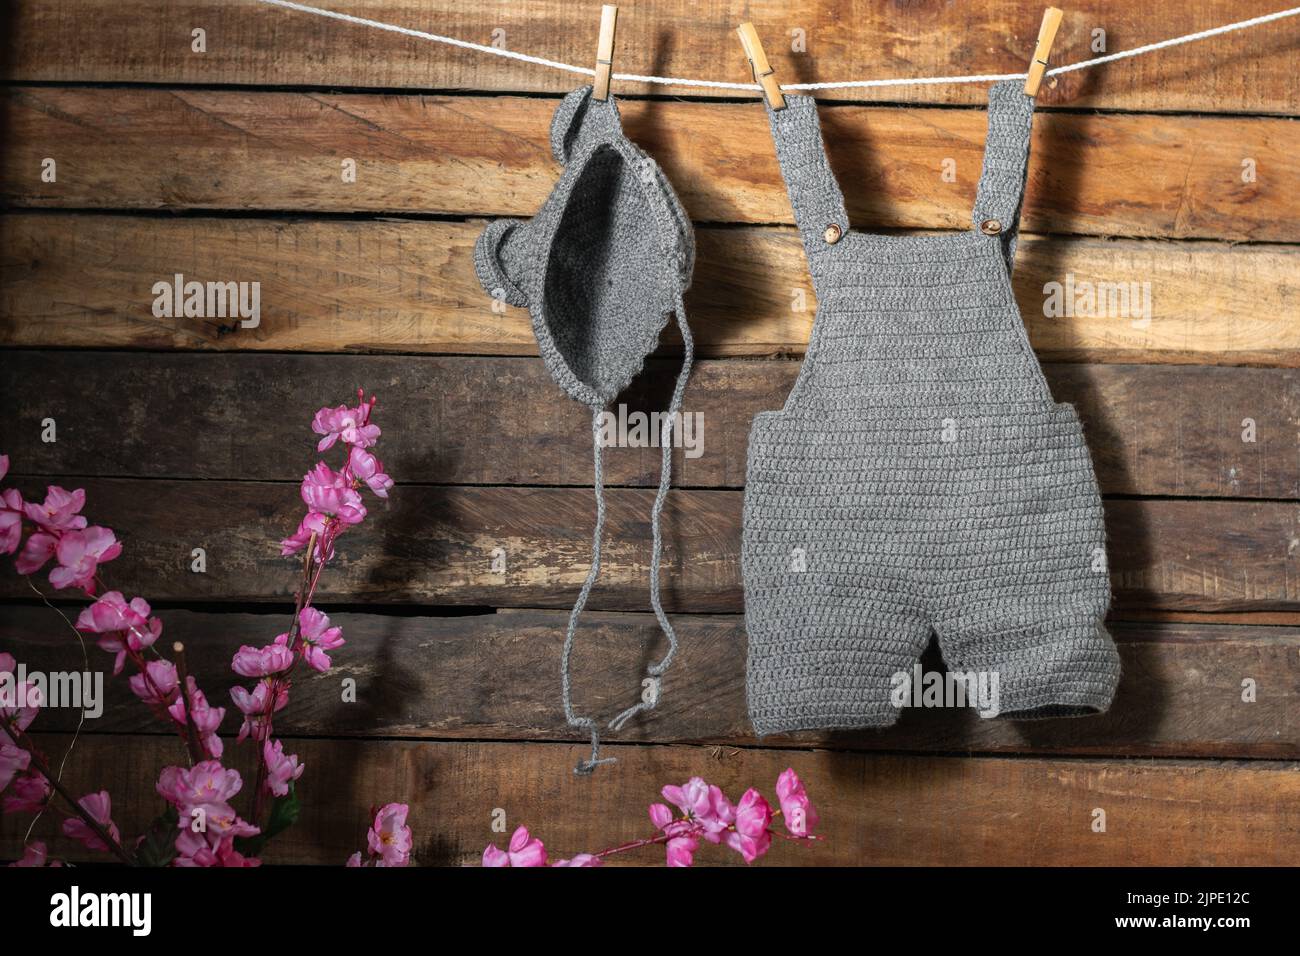 baby clothes hanging from a clothesline rope tied with wooden hooks, overalls and hat with ears knitted in the technique of hand crochet, on a backgro Stock Photo